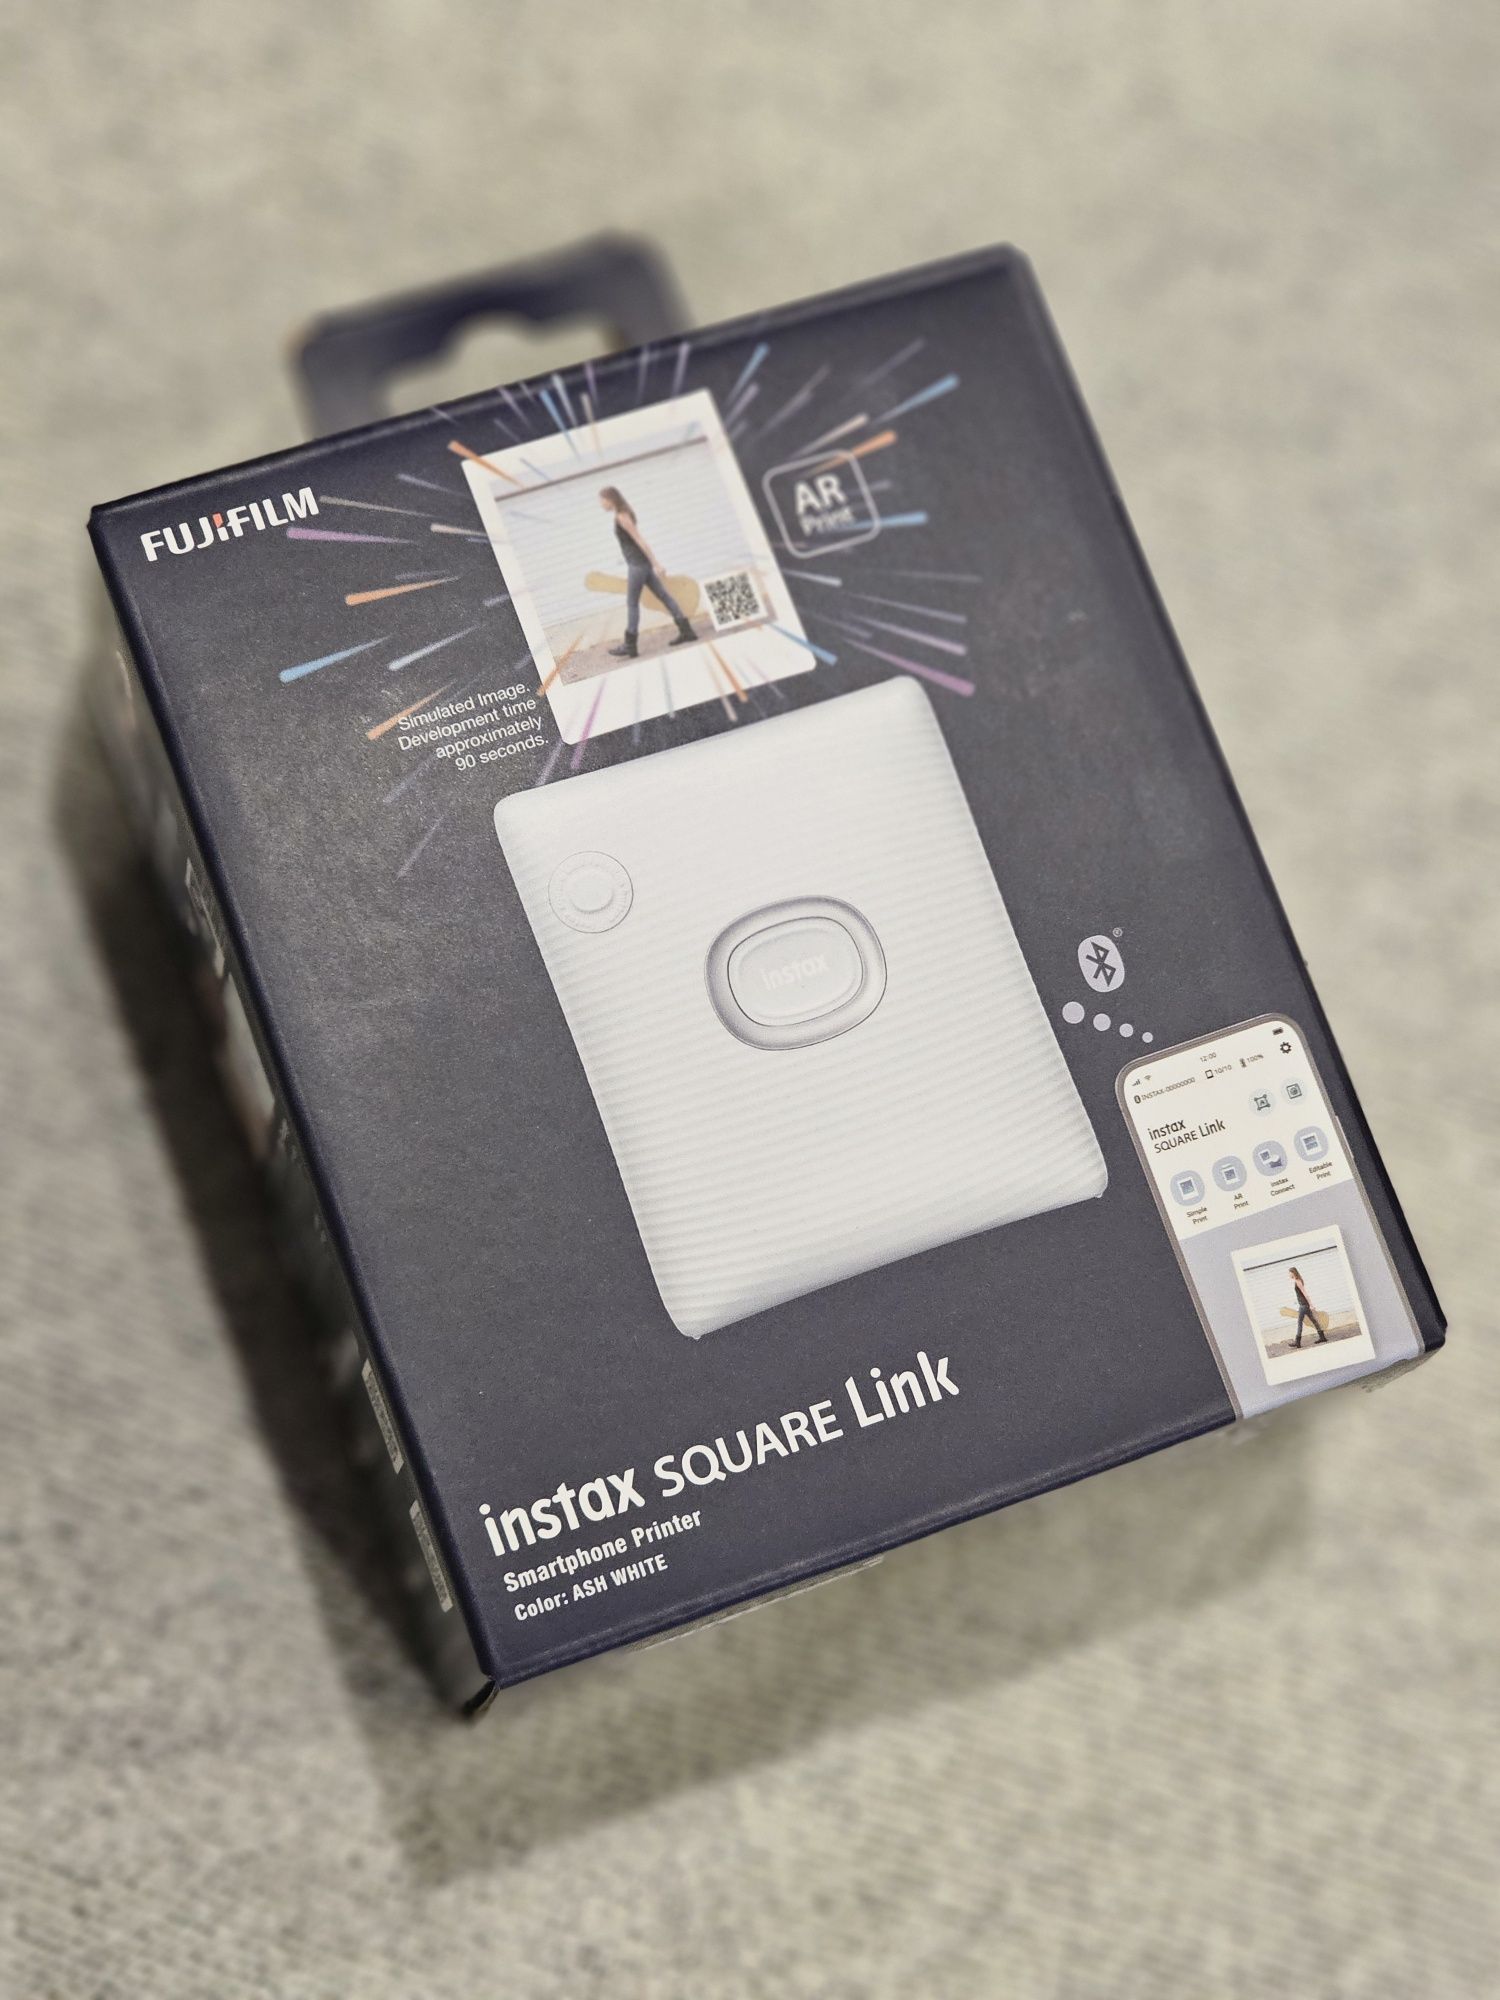 Instax Square Link NOWY